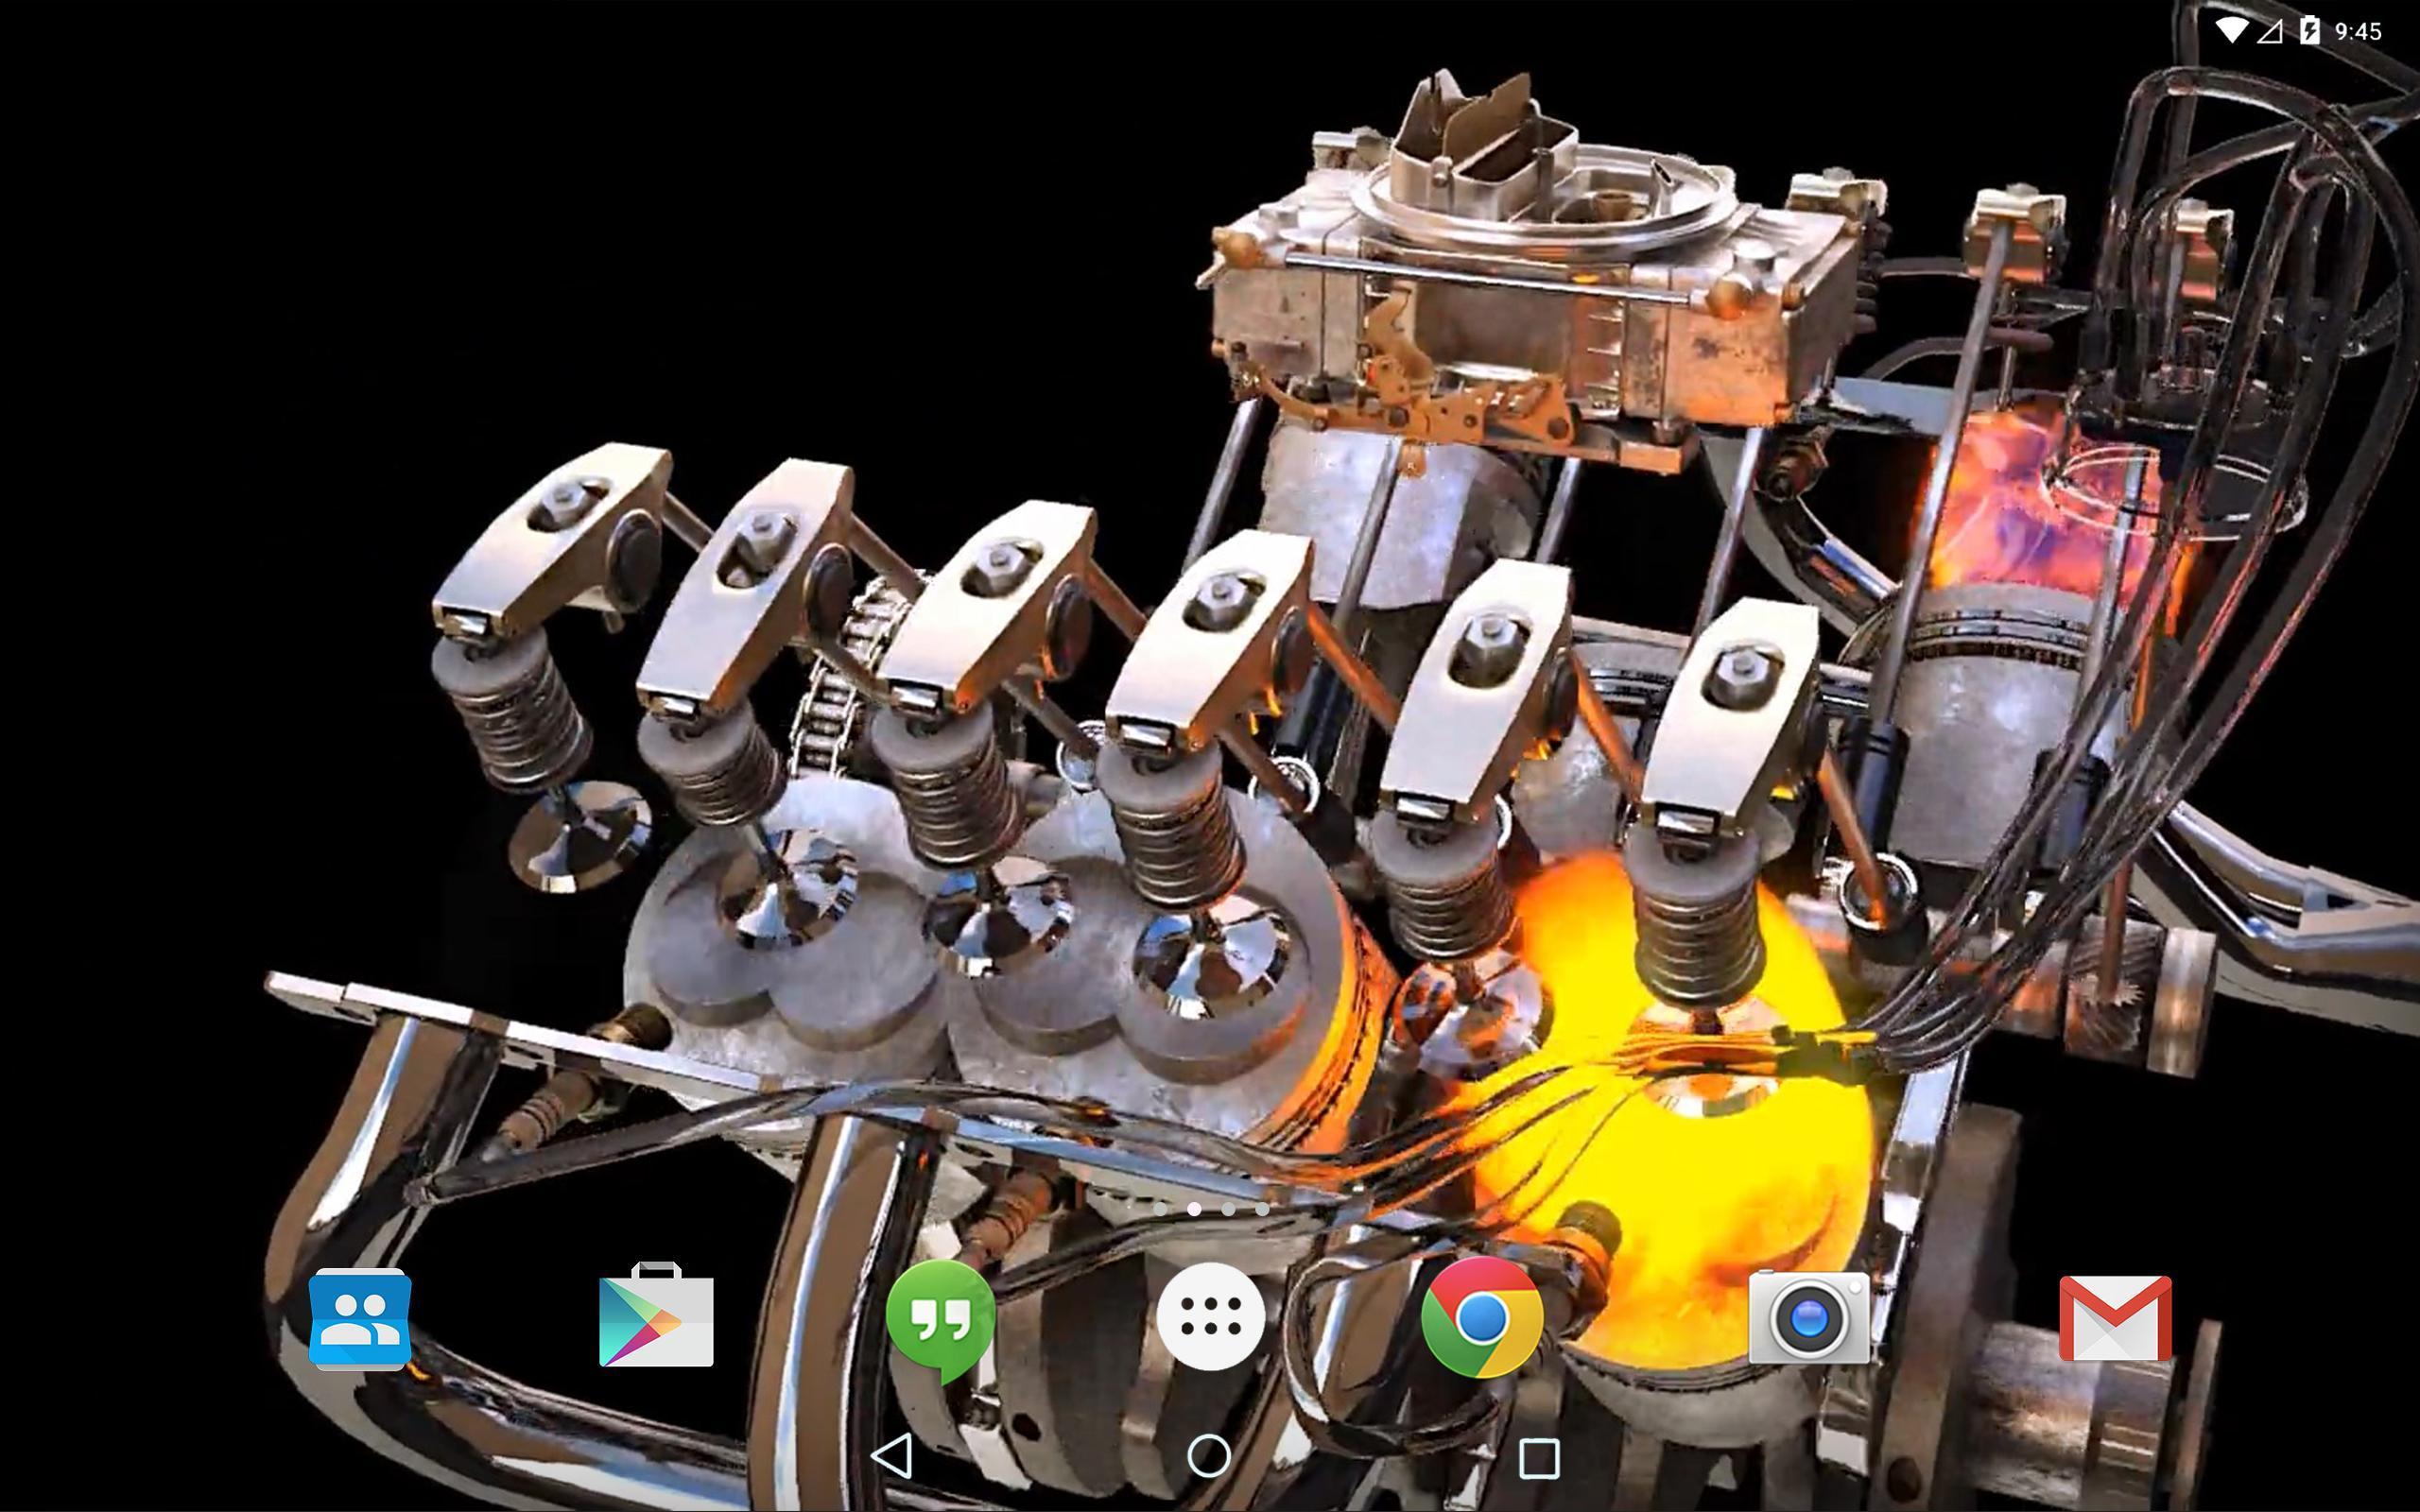 2560 x 1600 · jpeg - New 3D Engine Live Wallpaper for Android - APK Download